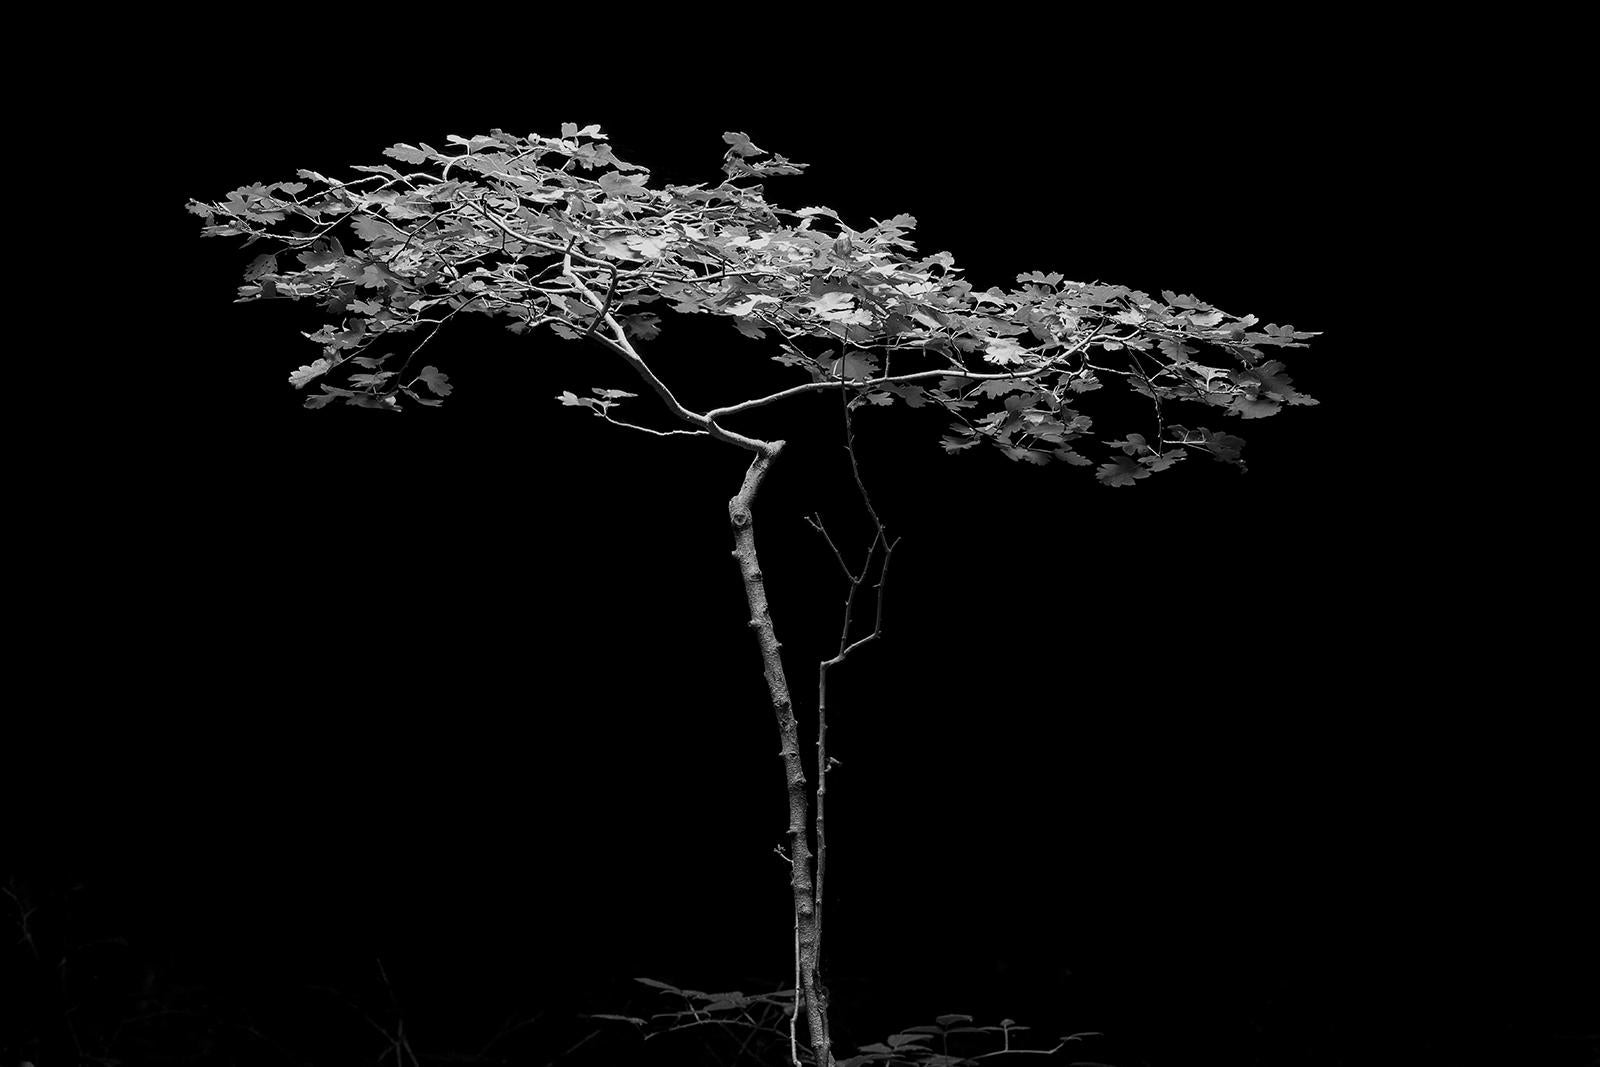 Ian Sanderson Black and White Photograph - Tree- Signed limited edition art print, Black white nature photo, Contemporary